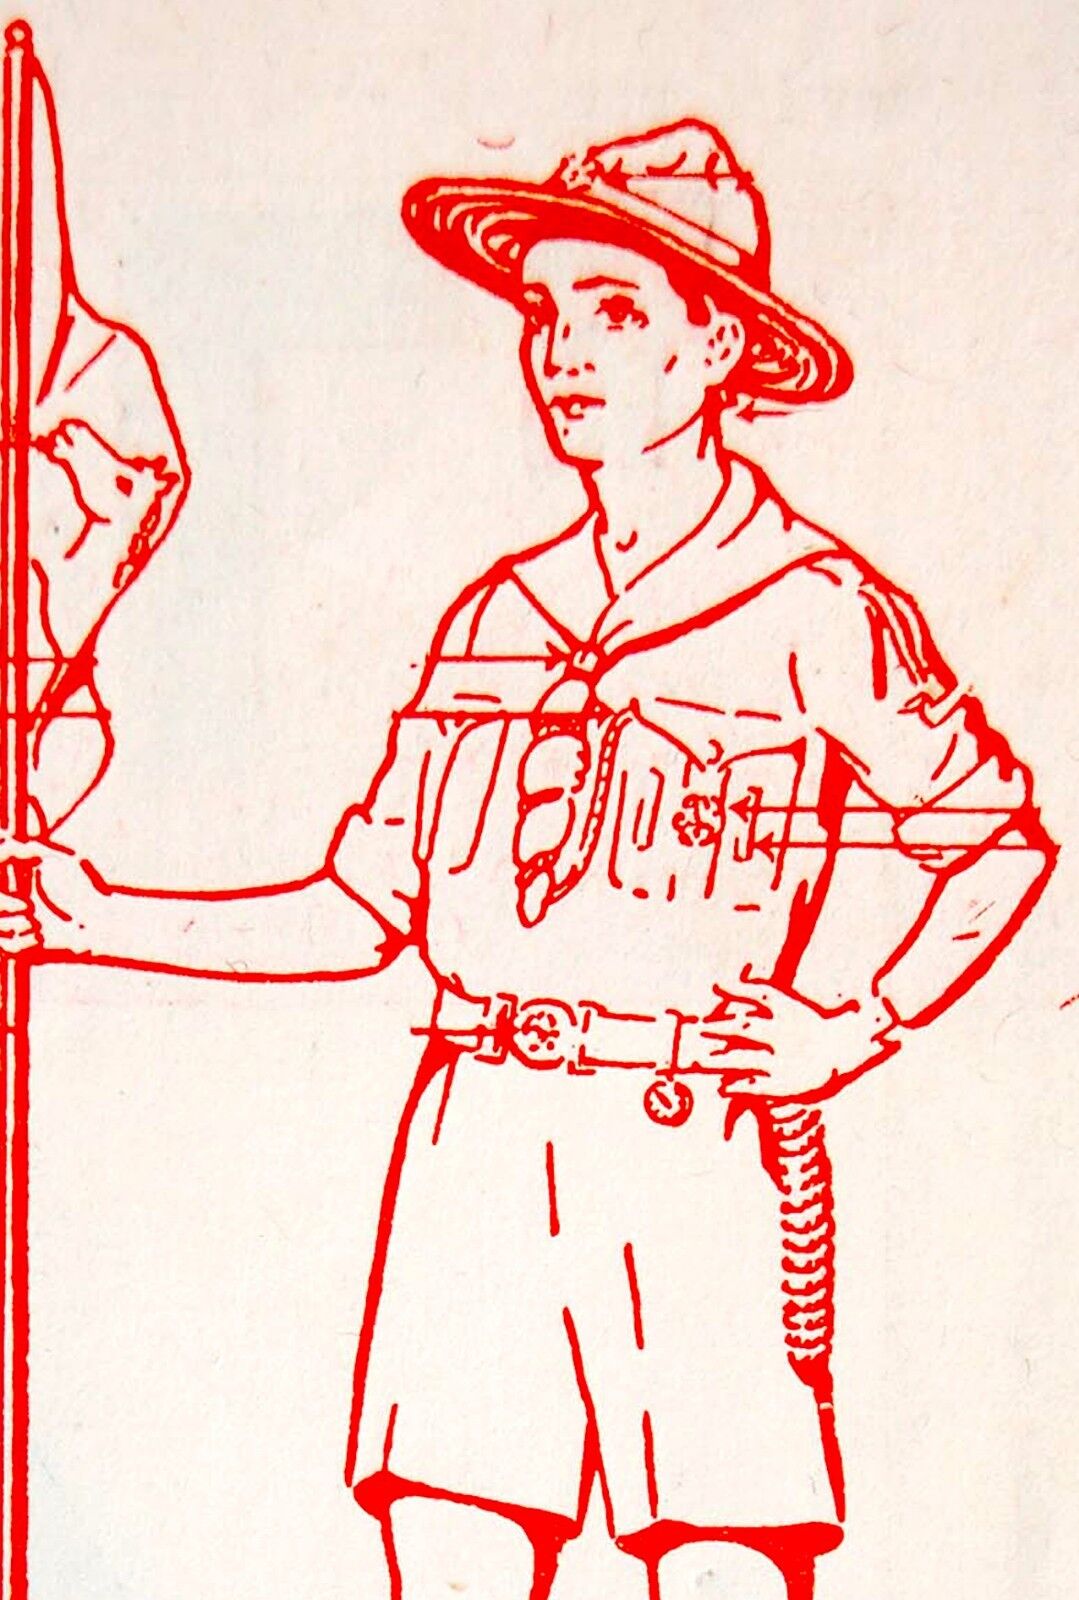 1950 Israel MAGAZINES Jewish SCOUTING FOR BOYS Boy Scouting JUDAICA Photo HEBREW